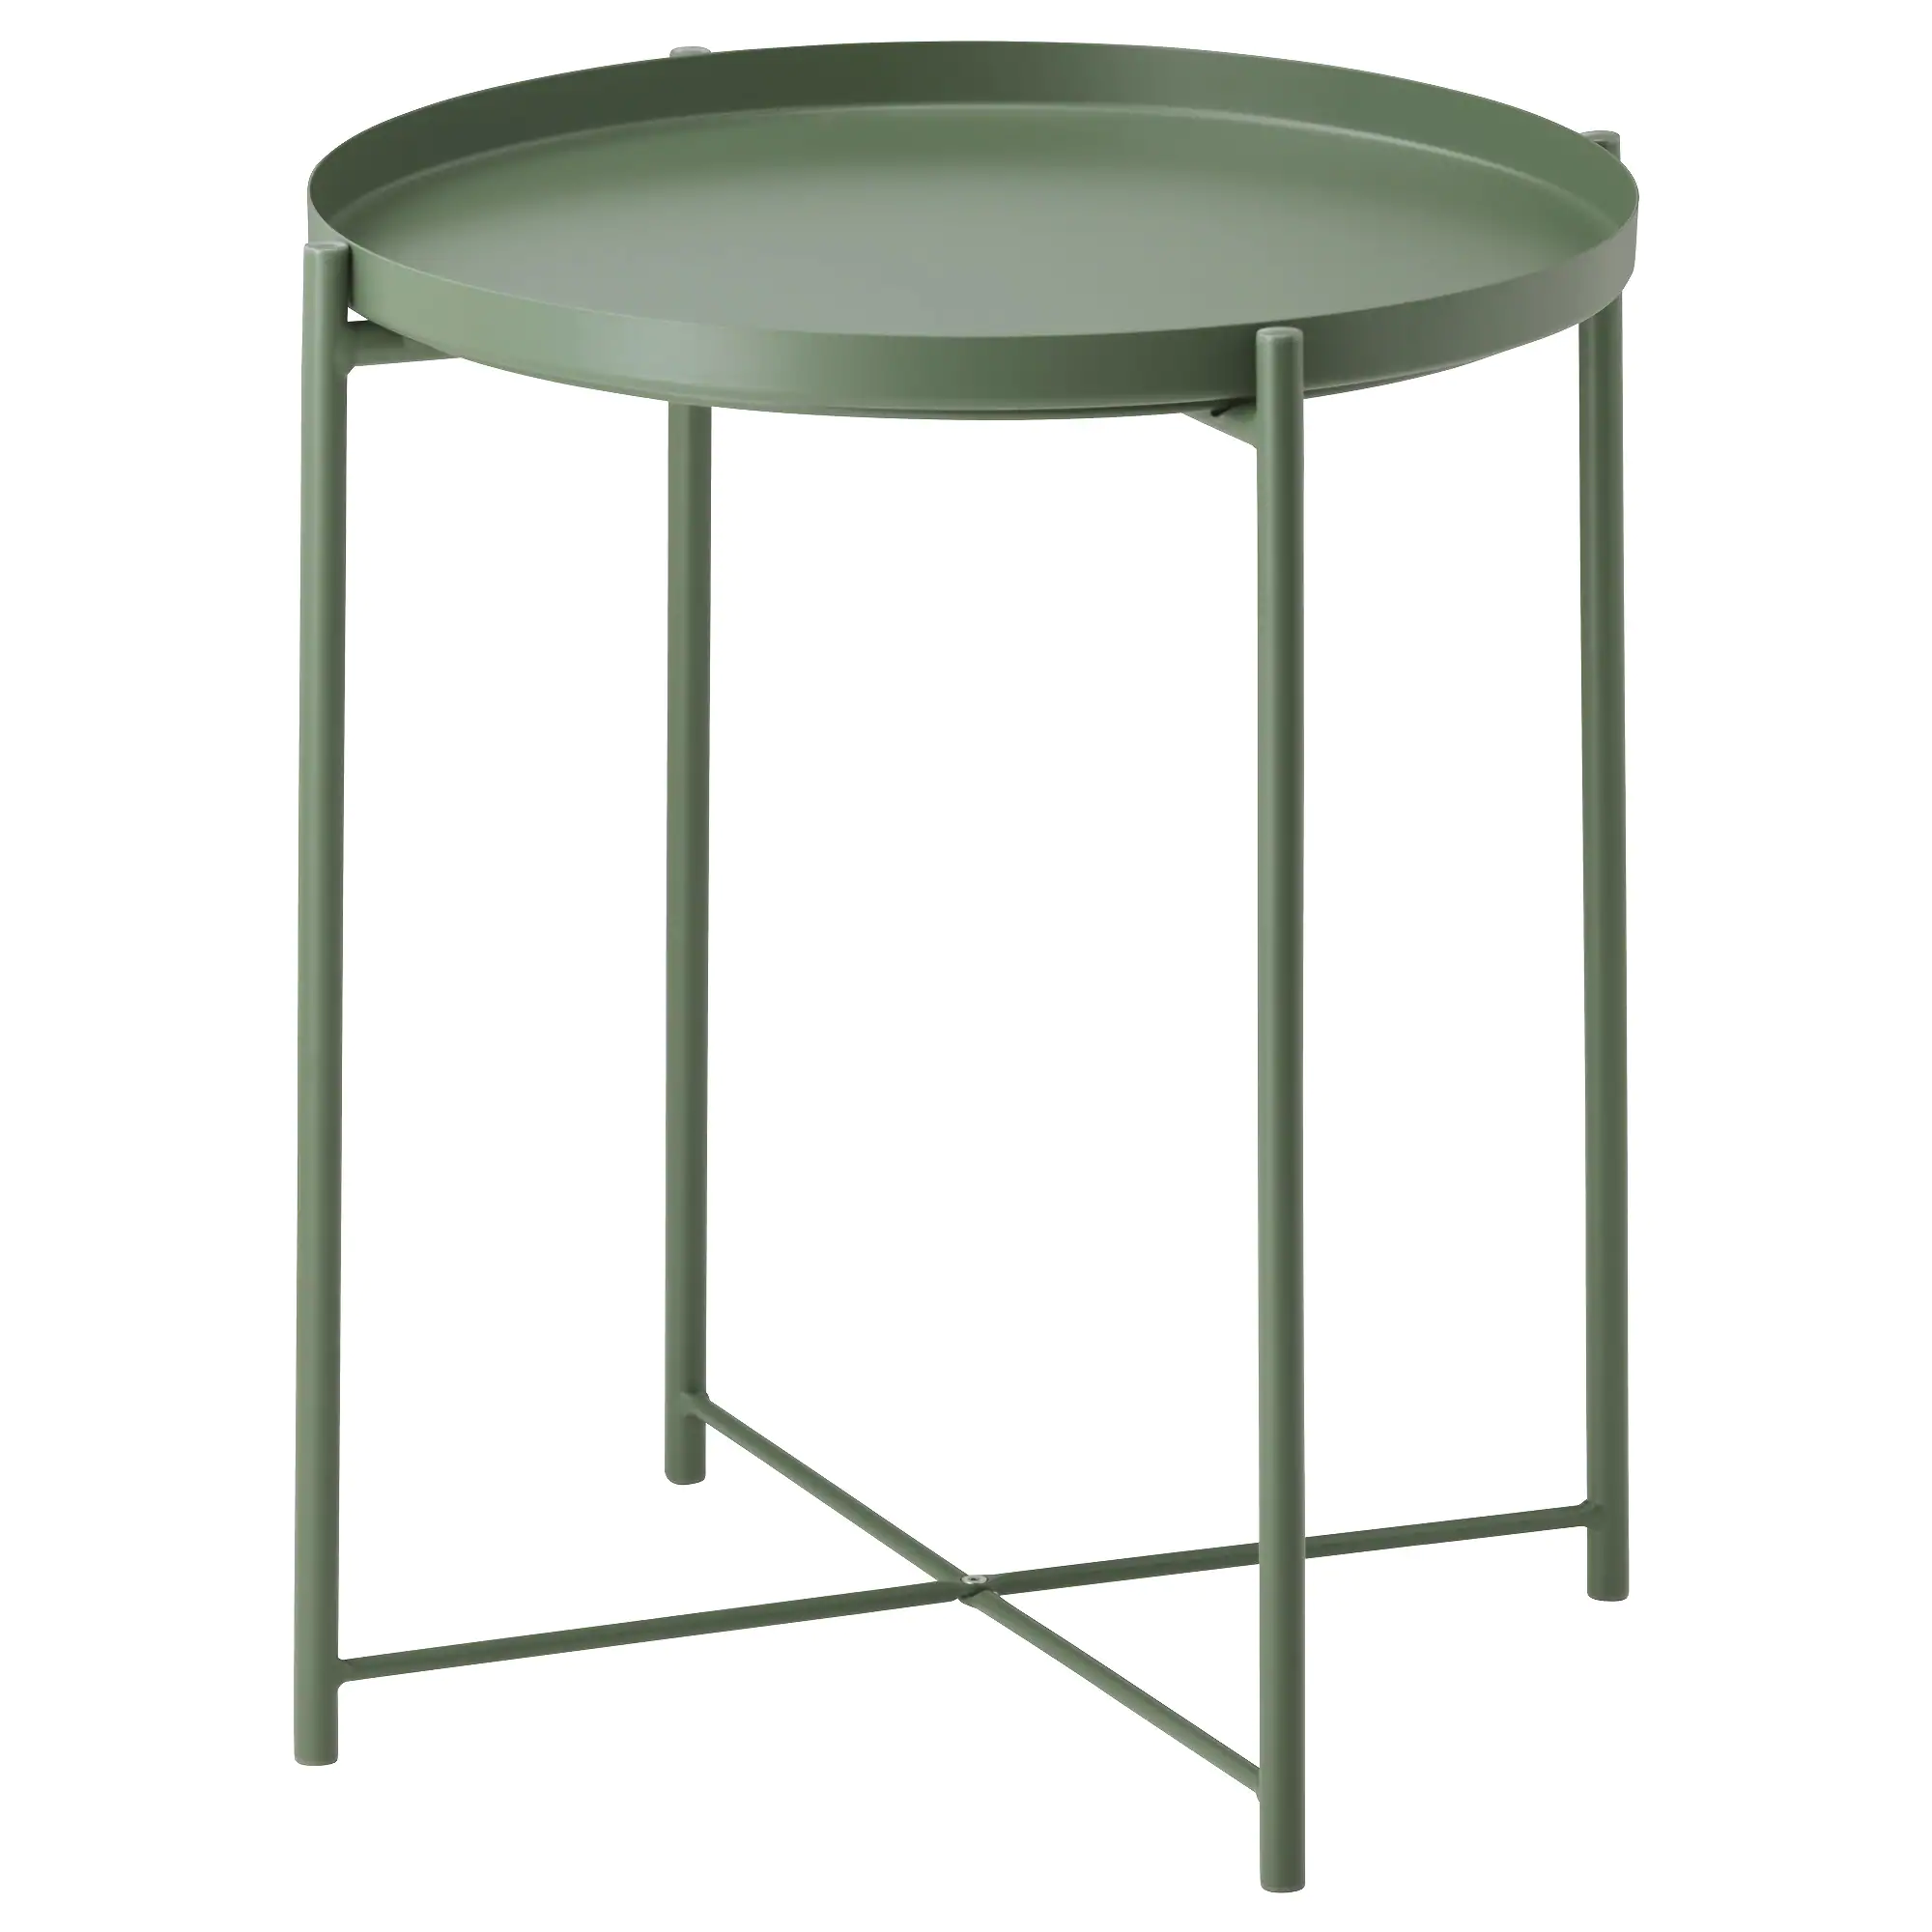 gladom tray table dark green ikea accent with farmhouse bench rustic end tables diy garden beer cooler teal lamp umbrella base wheels dorm furniture metal top living room storage